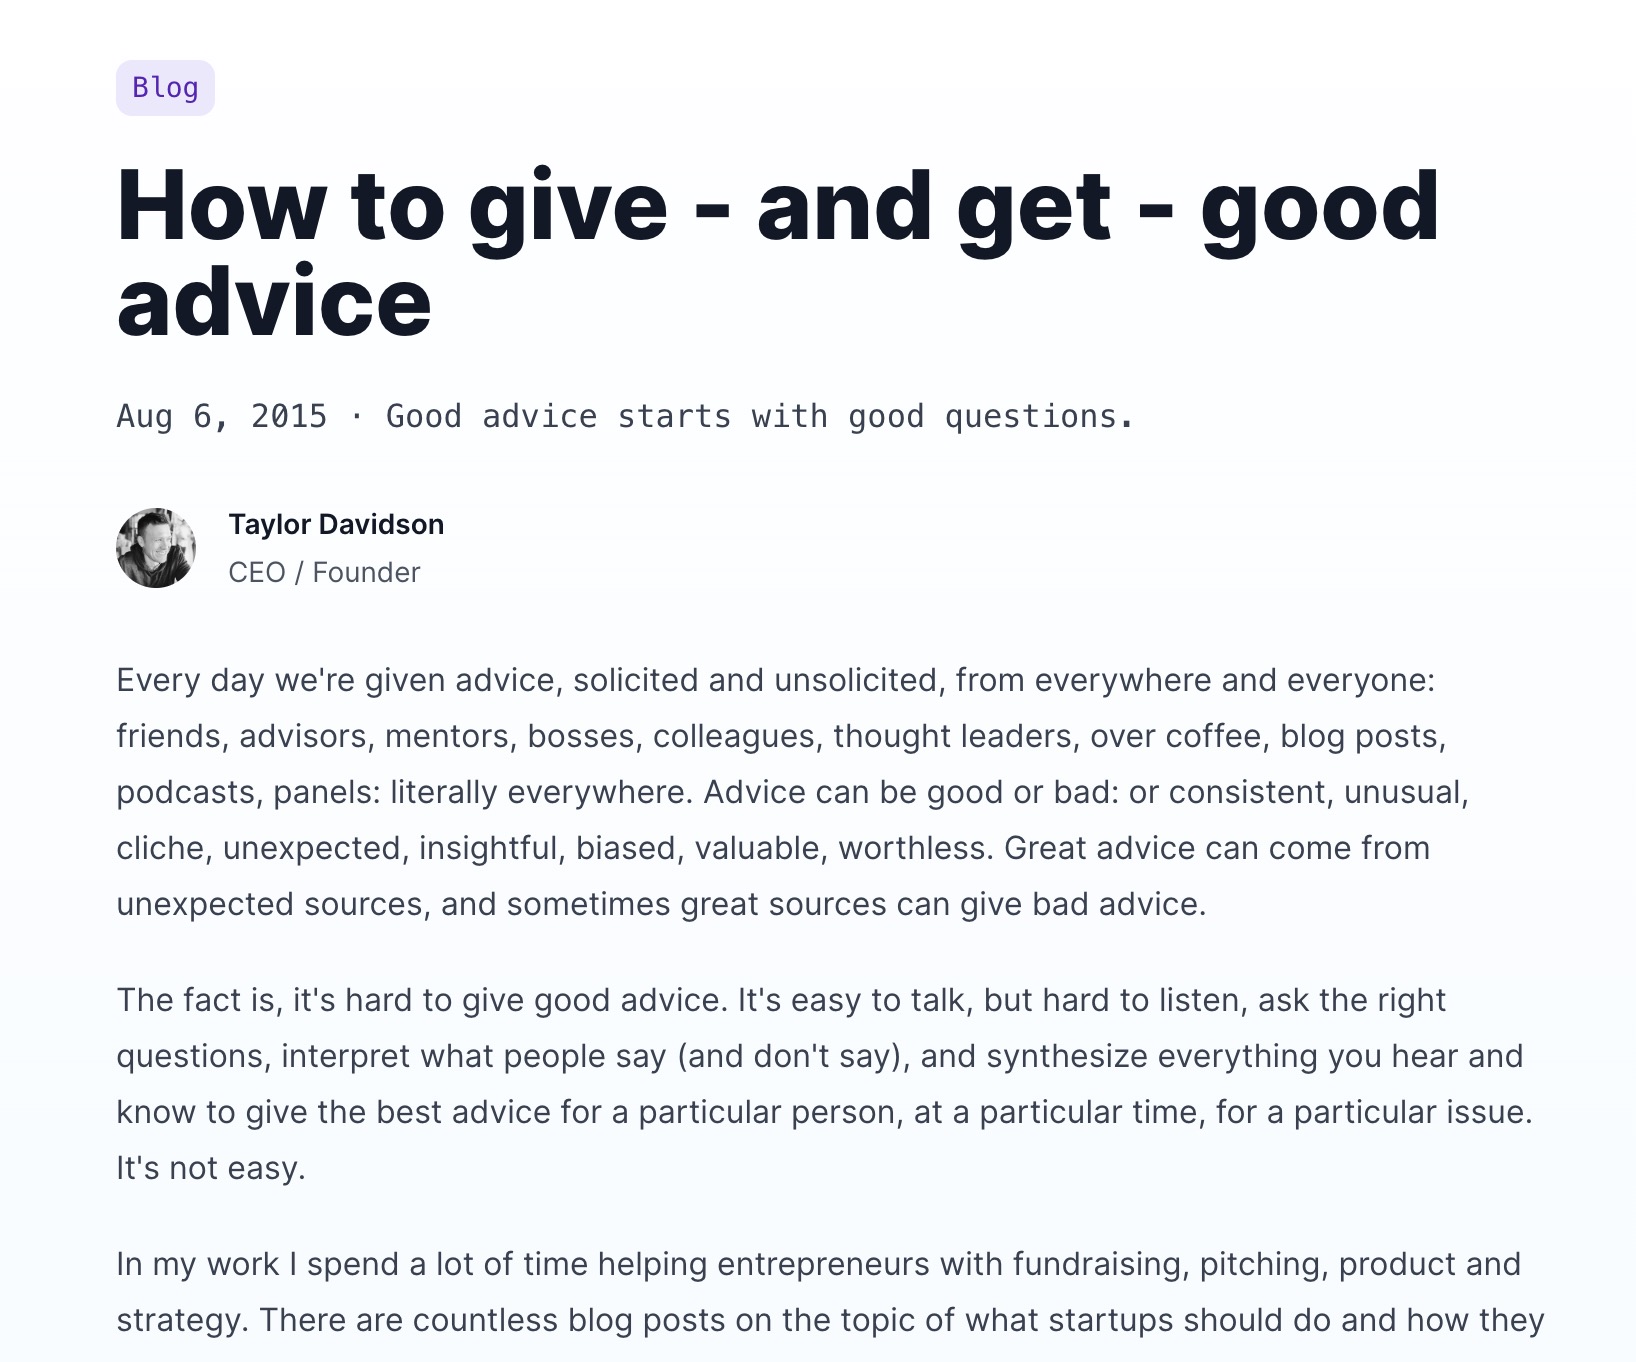 How to give - and get - good advice